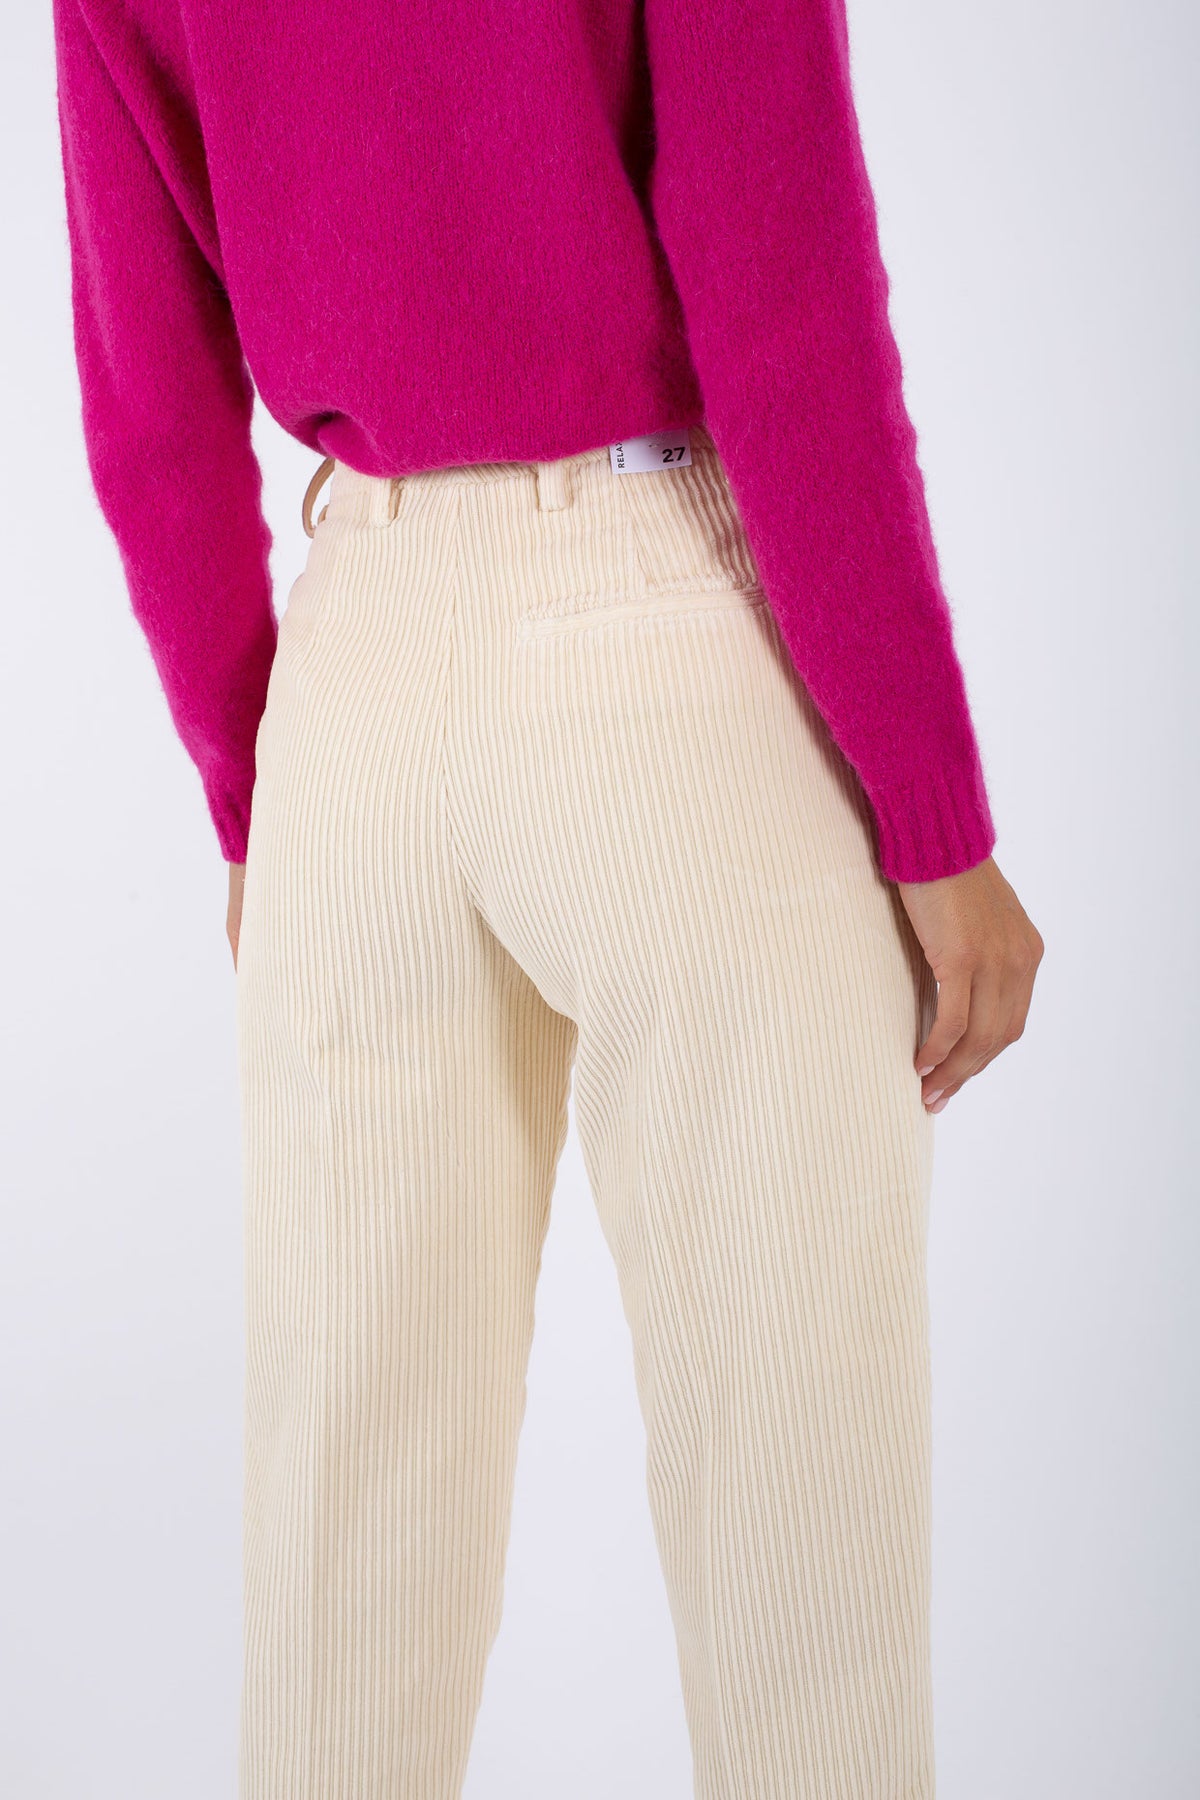 Roy Roger's Chino Maemi French Cord Giallo Donna - 5